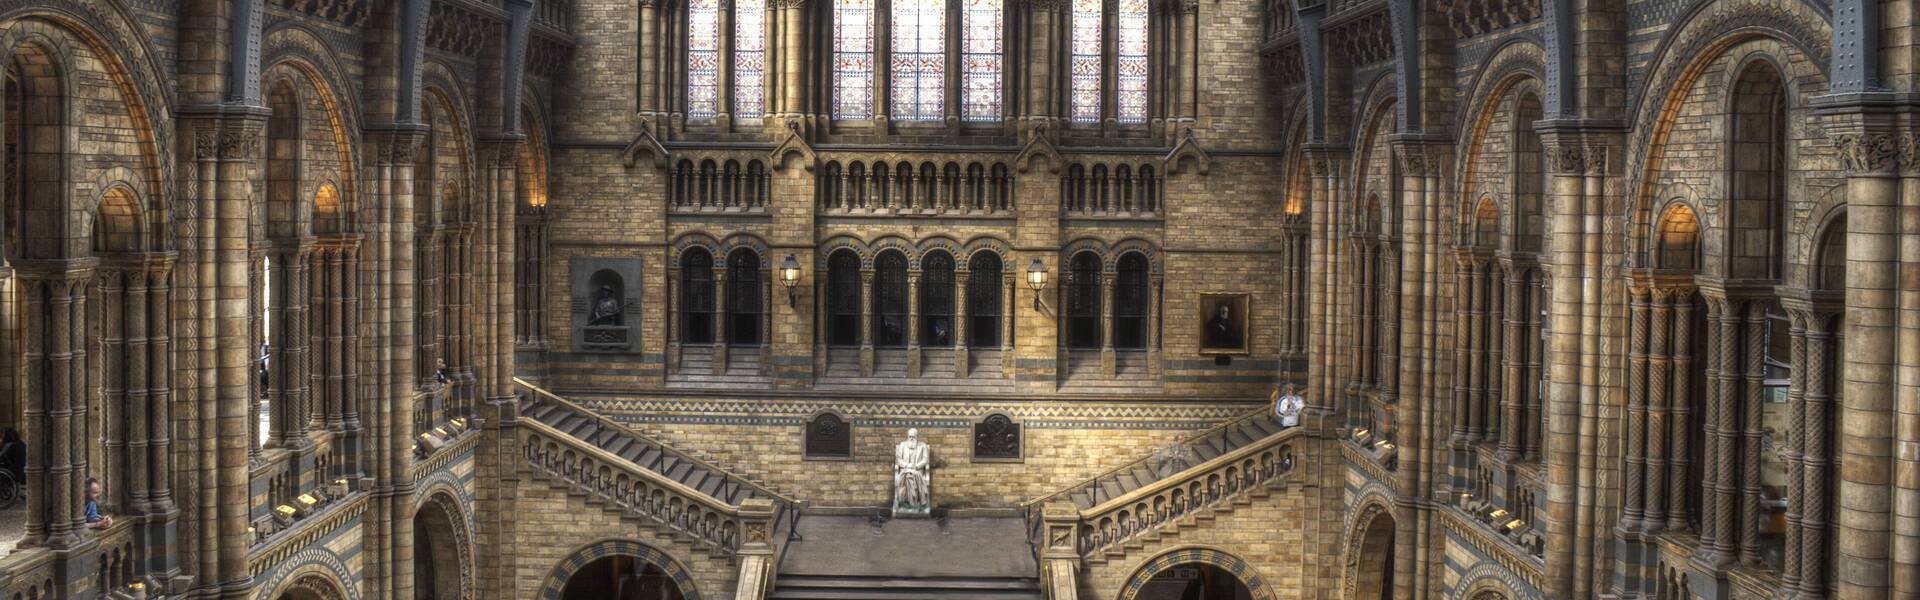 The_Natural_History_Museum_1920x600